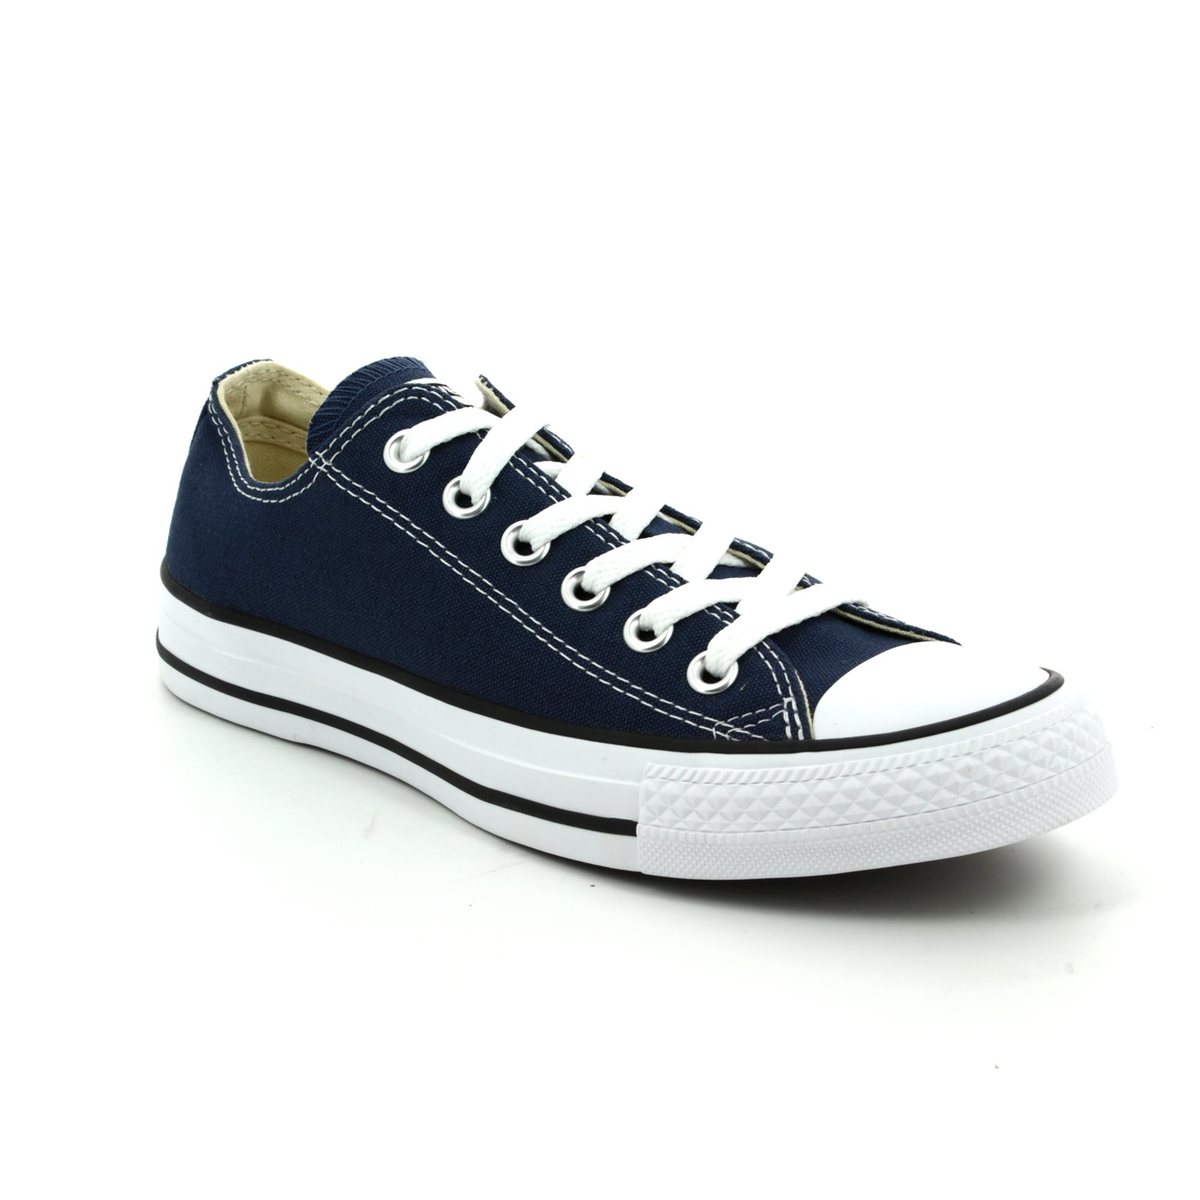 Converse Allstar Ox Navy Womens trainers M9697C-001 in a Plain Canvas in Size 10